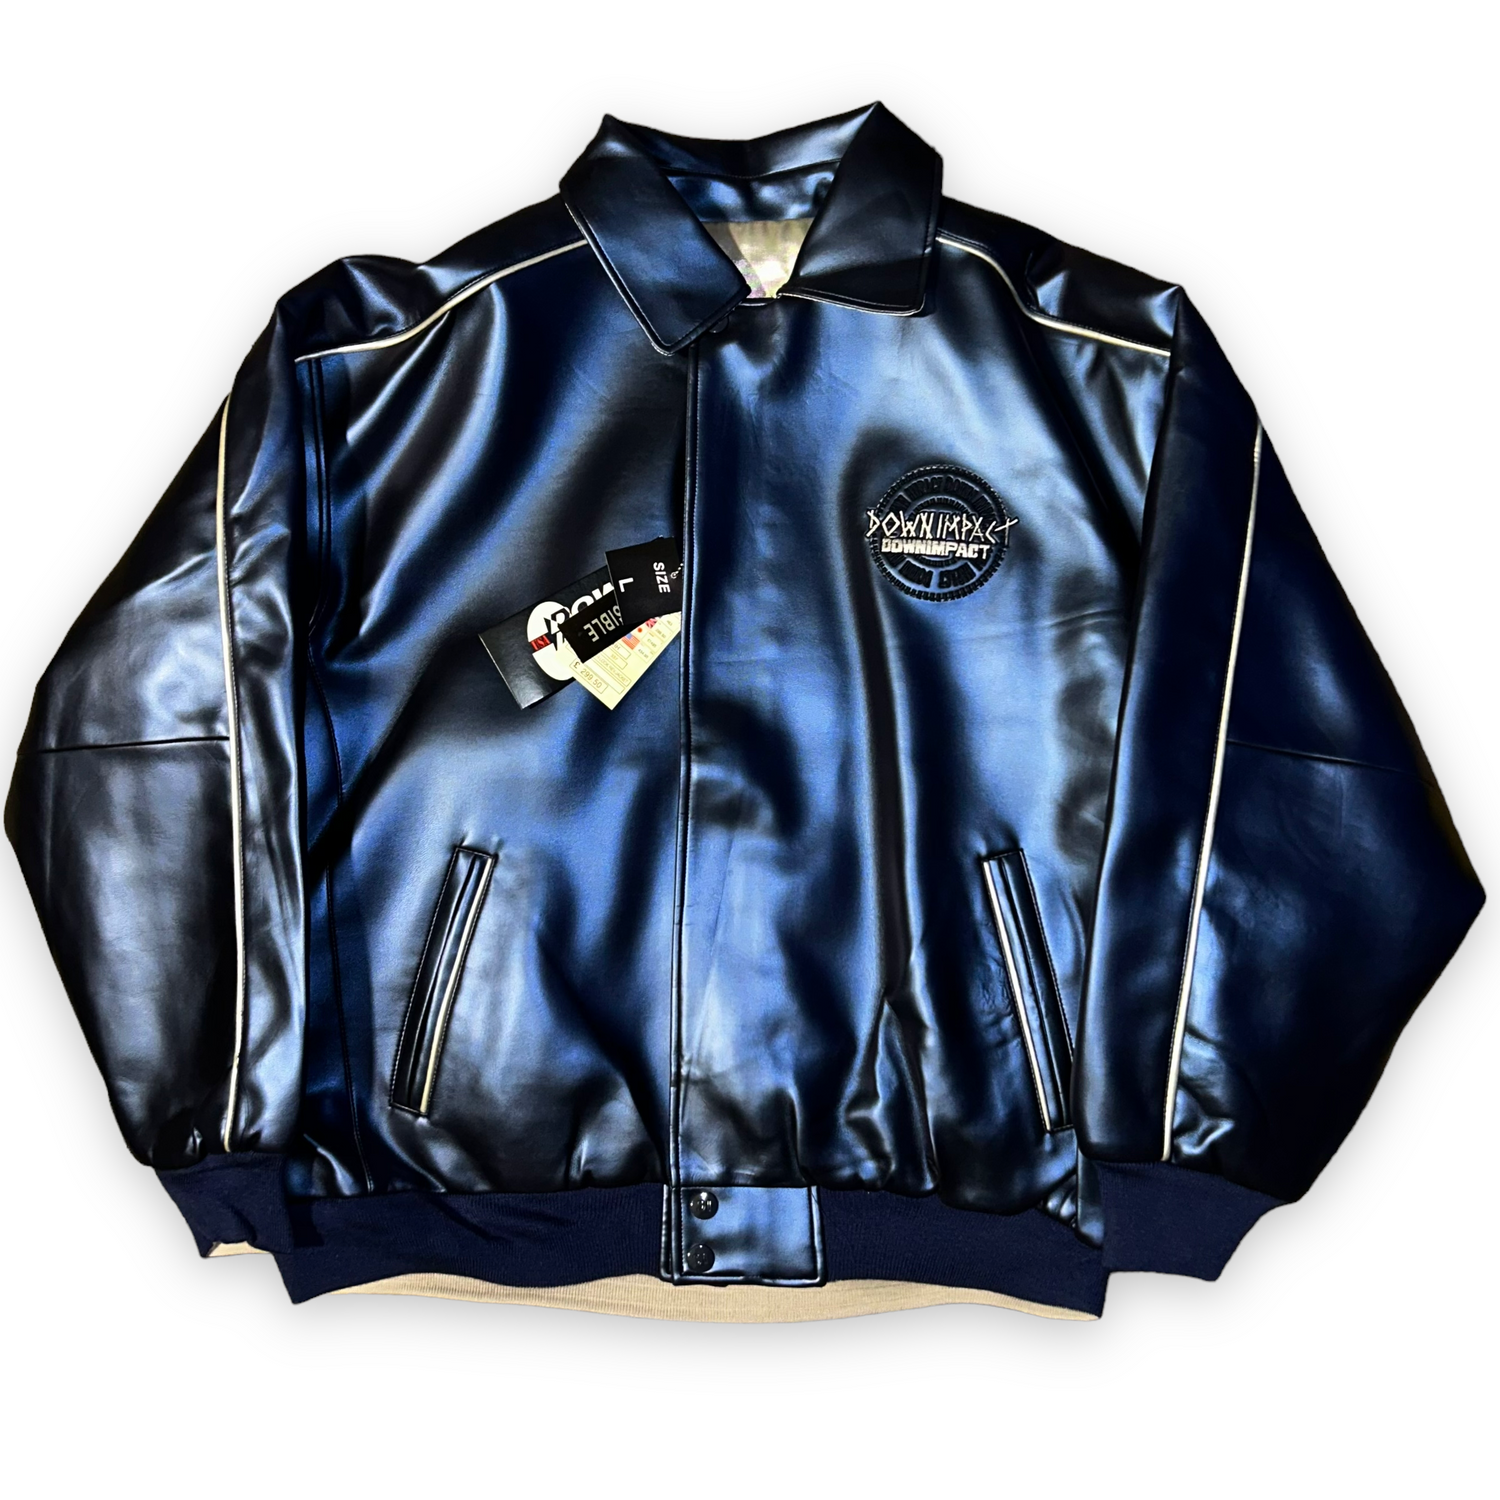 Bomber Down Impact doublefaces in Hip-hop Vintage leather